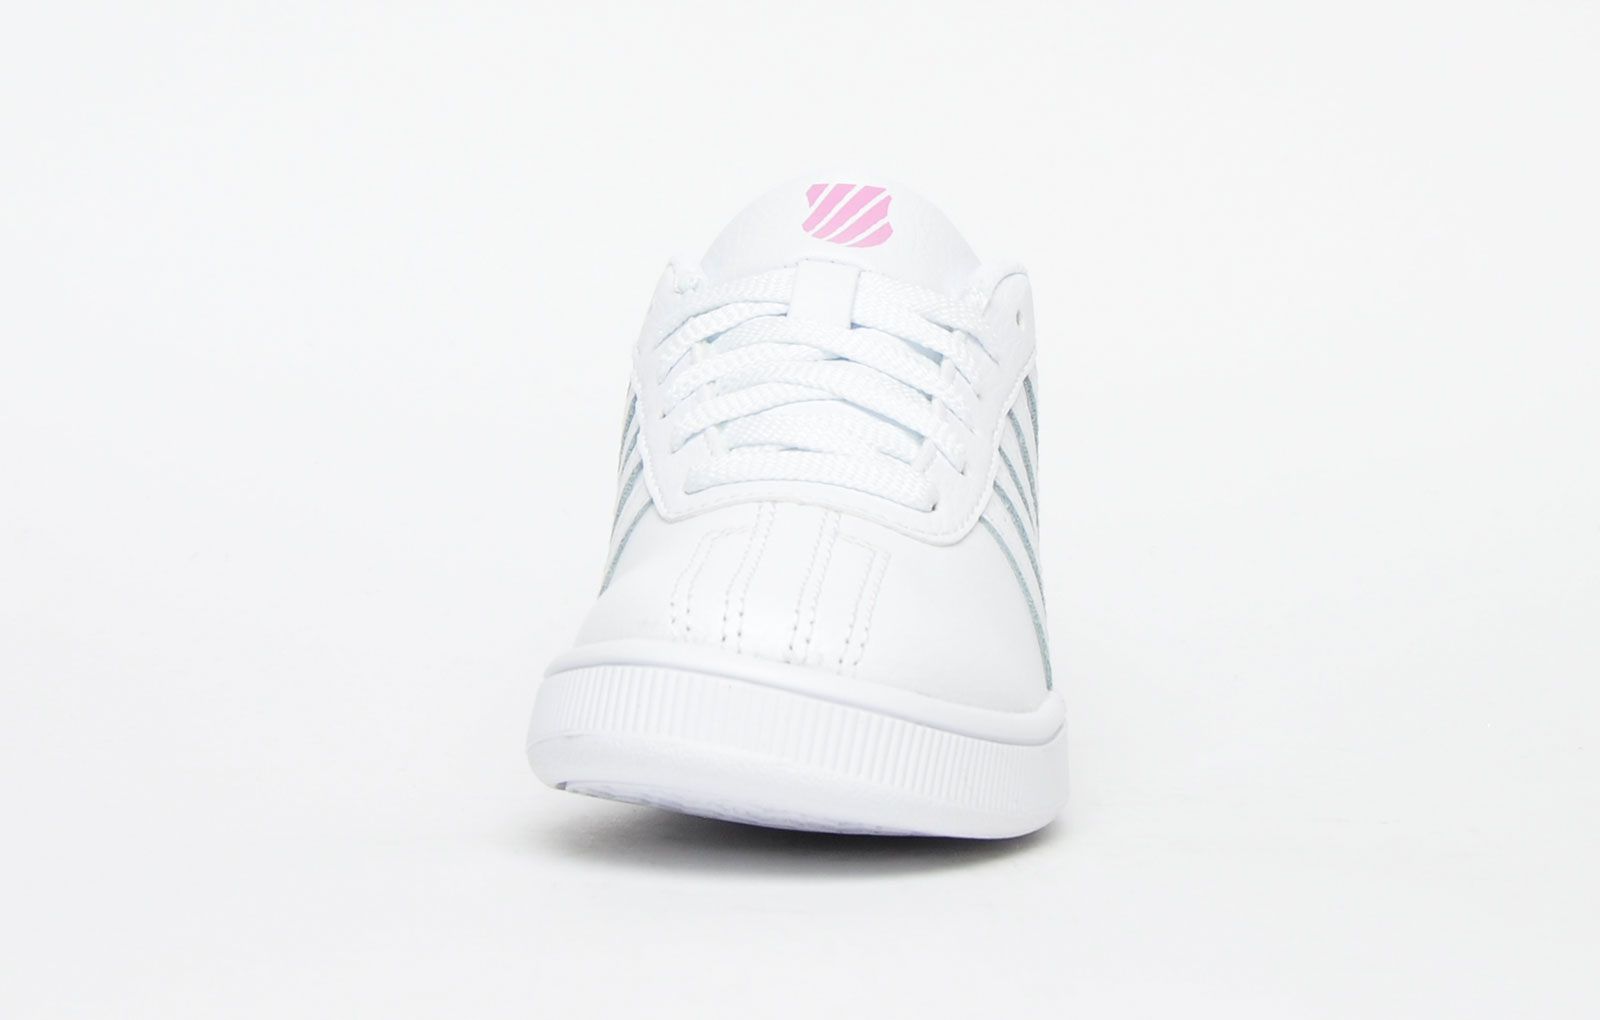 <p>The K Swiss Classic Pro is a classic low-top trainer constructed in a luxe white leather upper with the brand's iconic 5-stripe design adorning the sides, with an shield logo on the tongue, delivering a pristine designer look which anyone would be proud to wear. K Swiss trainers combine quality, style and performance all rolled into one and this K Swiss Classic Pro is no exception, with its intricate decorative stitch detailing and traditional lace up fastening to keep your feet firmly in place, the Classic Pro is a timeless style offering a dynamic look. <br></p><br> <p class=